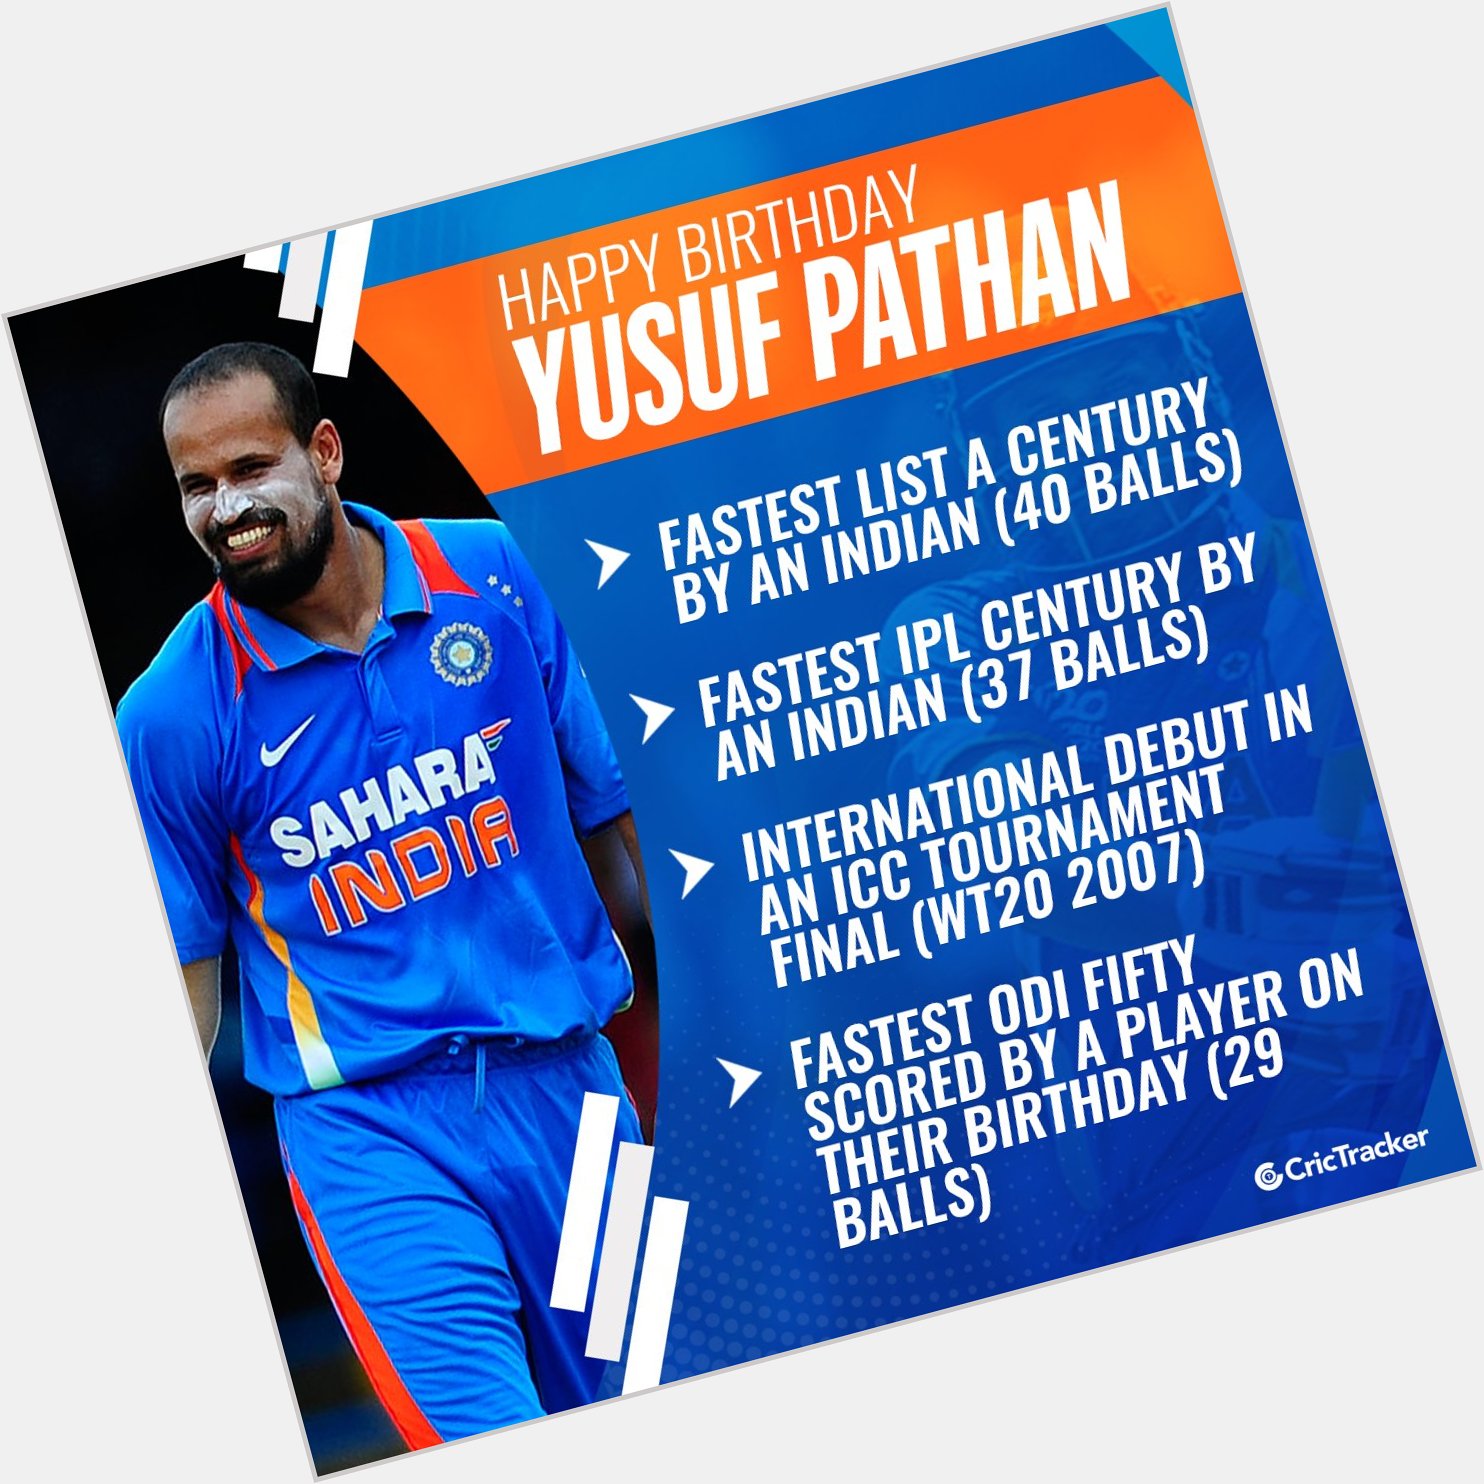 Wishing Indian all-rounder Yusuf Pathan a very happy birthday.    